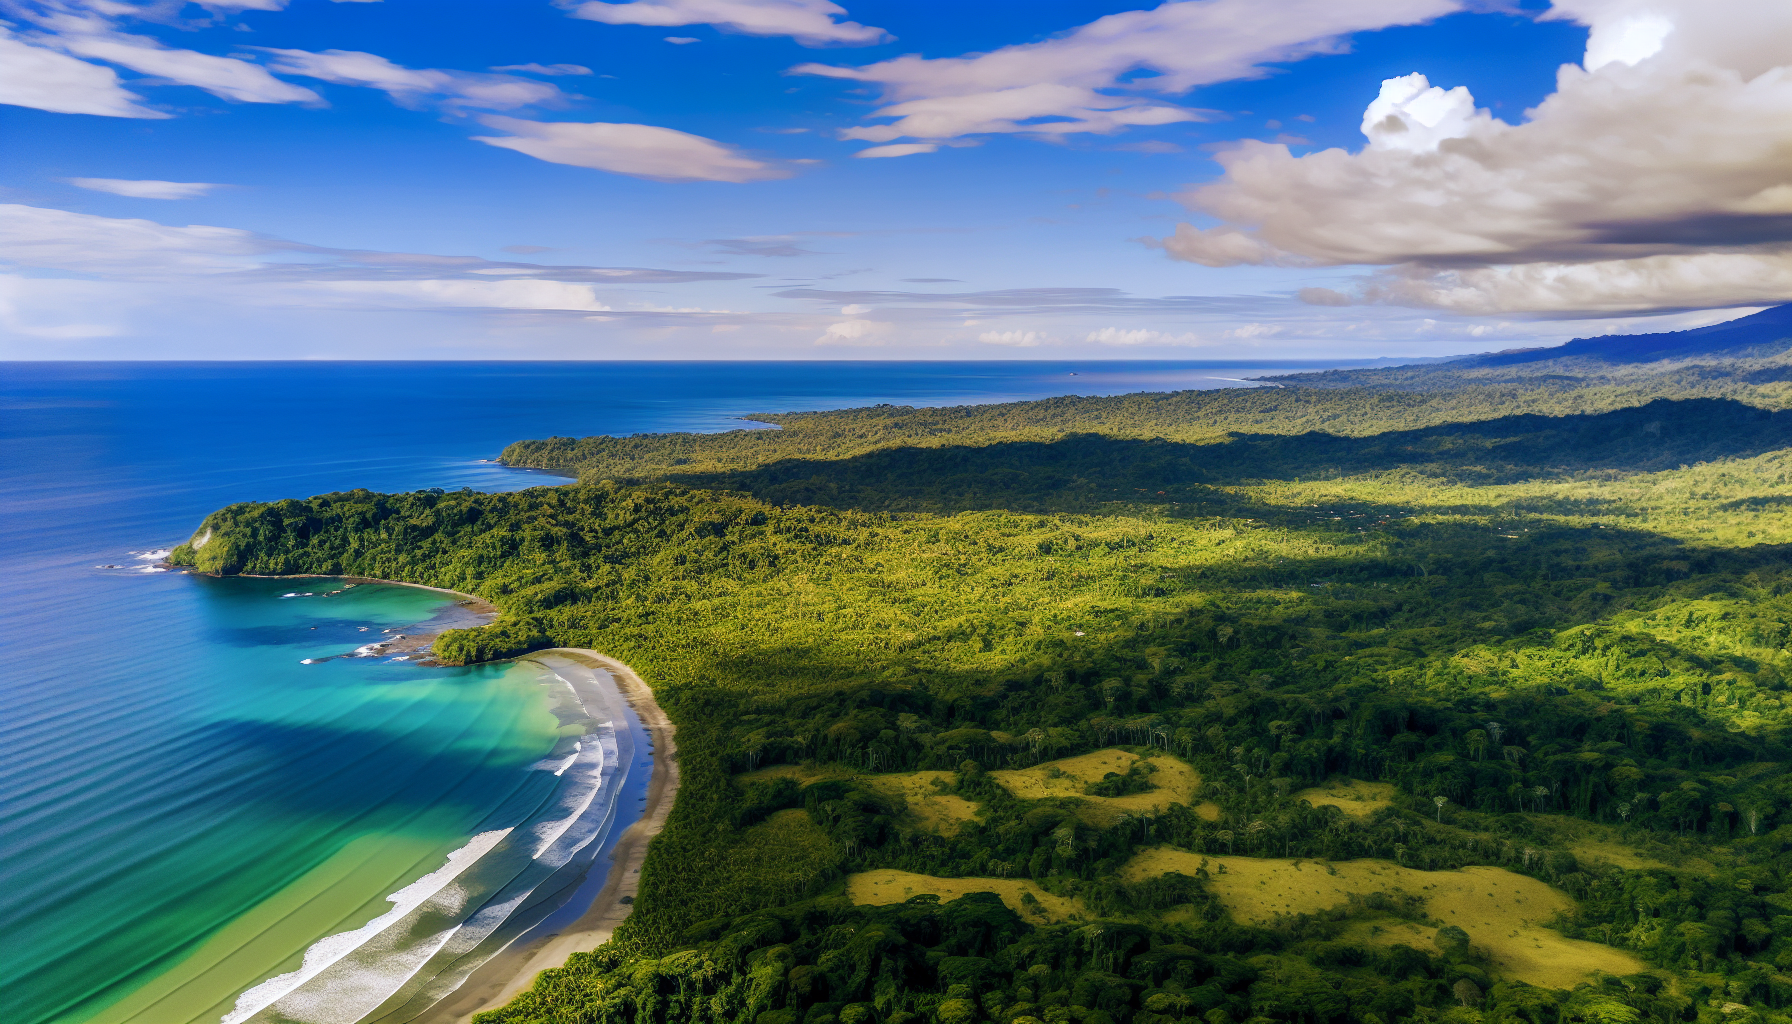 Aerial view of Costa Rica's lush rainforests and beautiful beaches